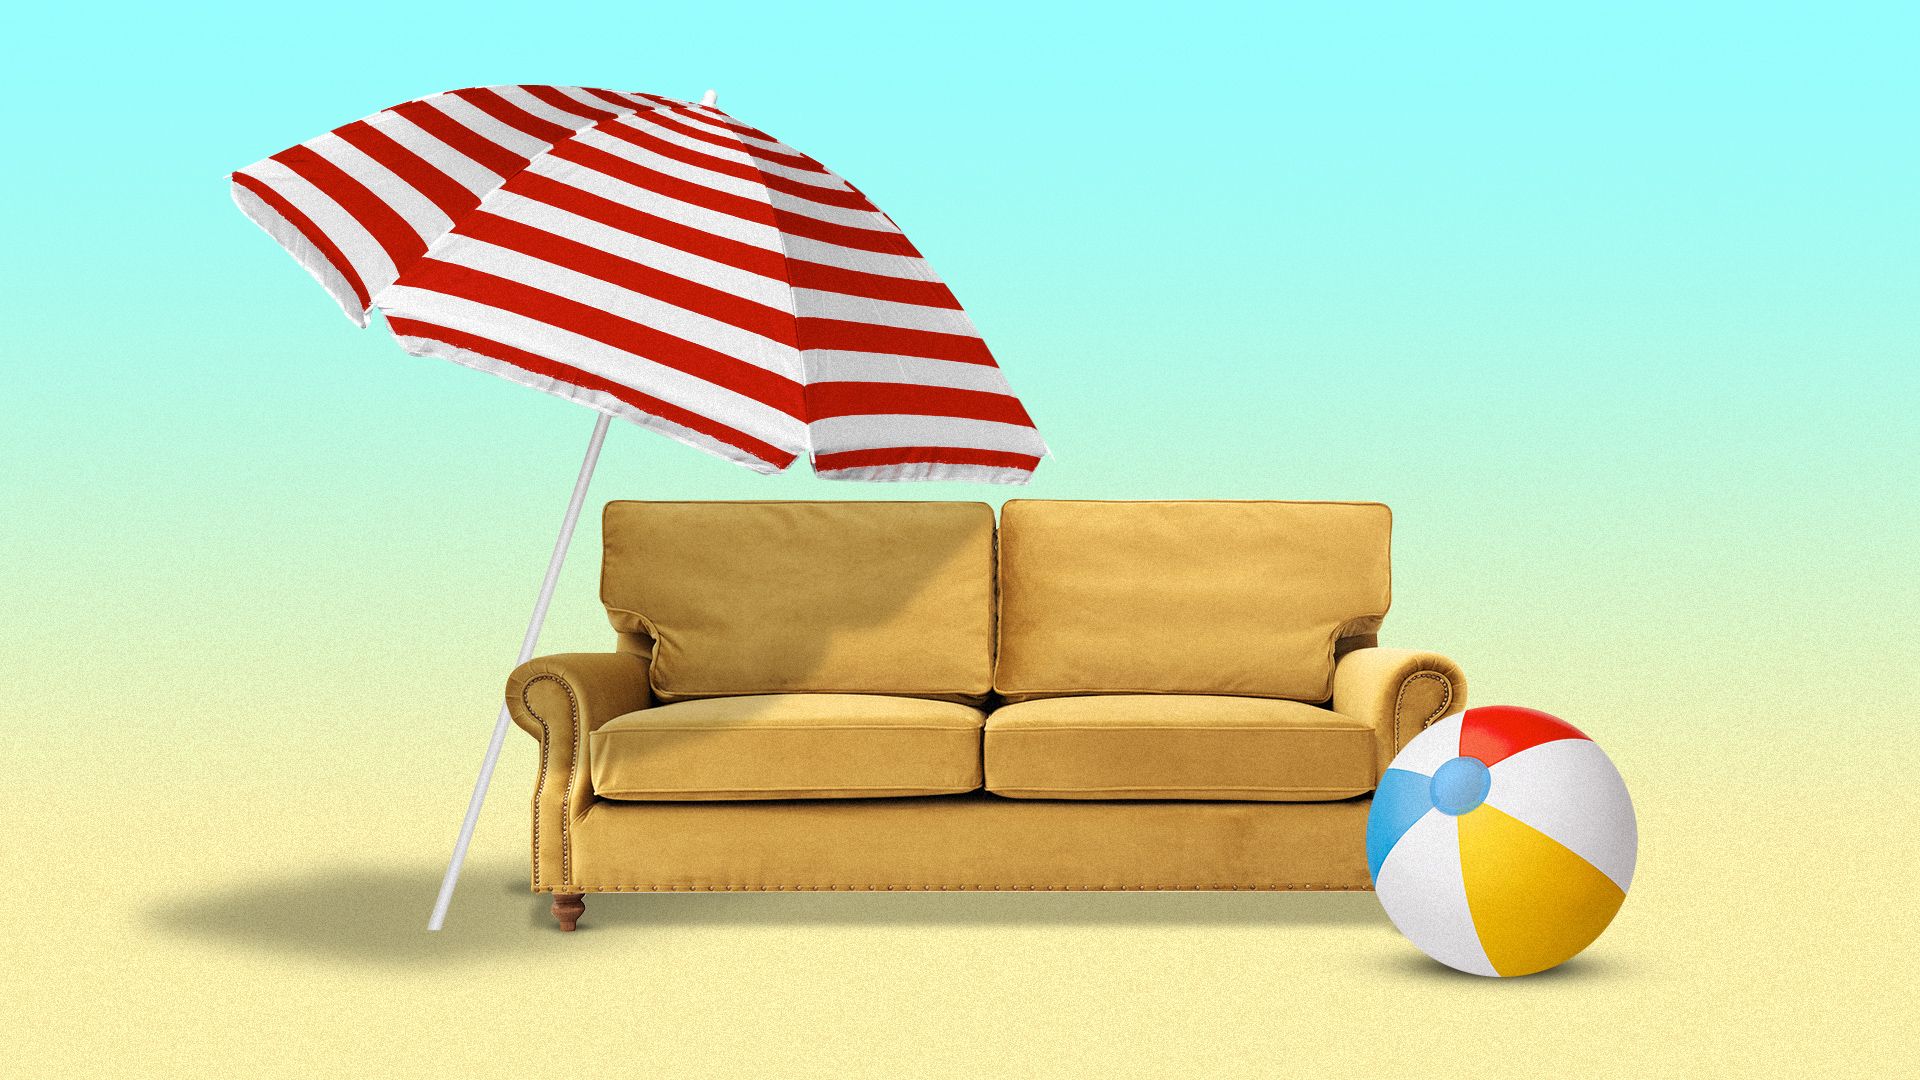 Illustration of a couch with a beach umbrella and a beach ball.